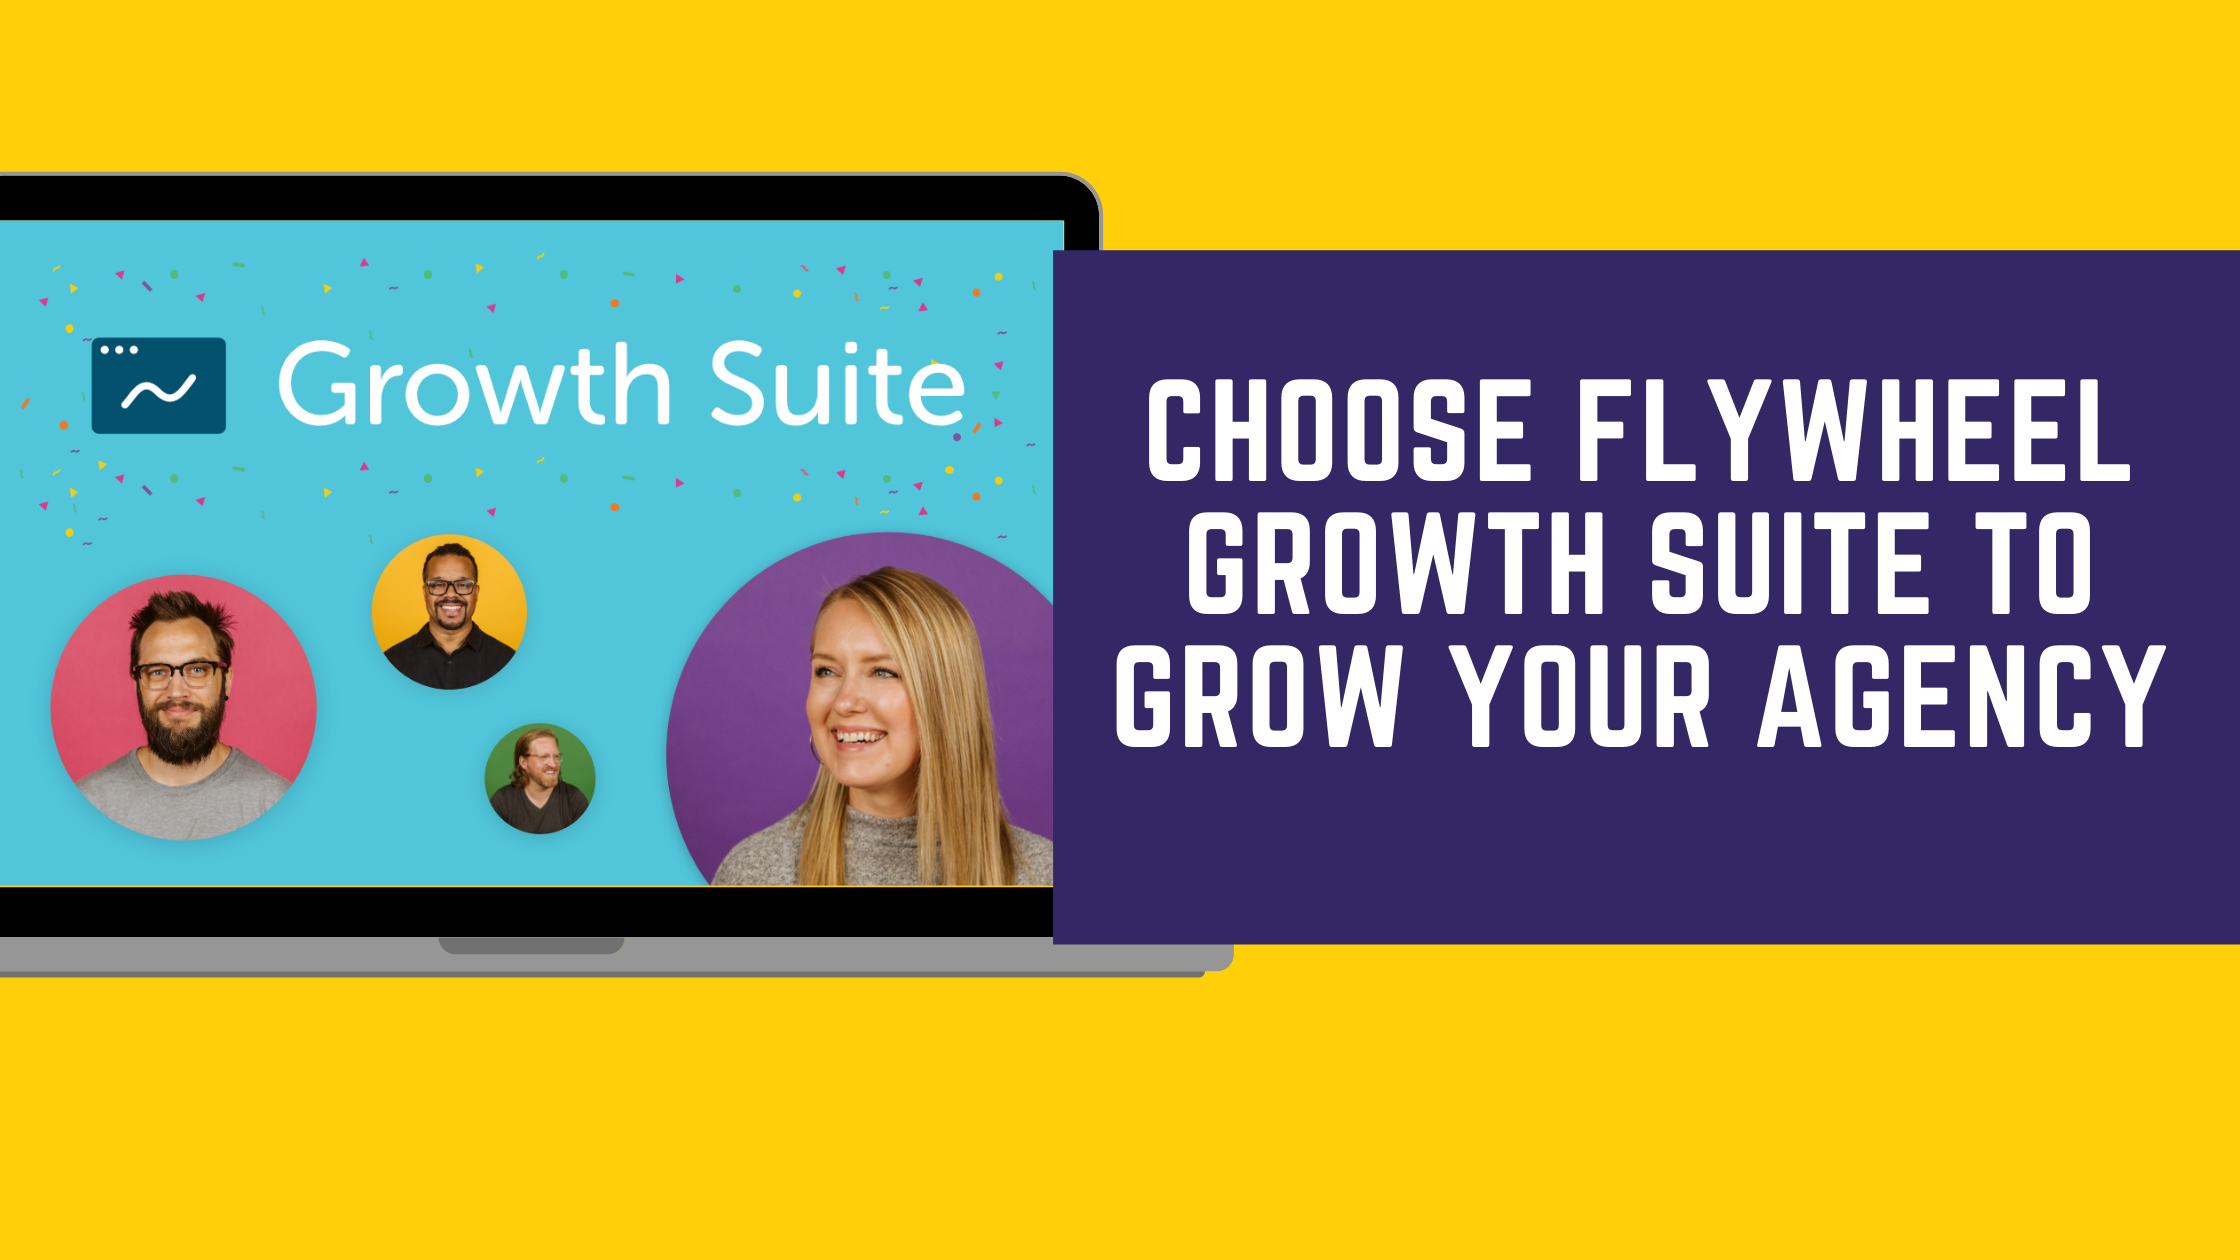 Growth suite